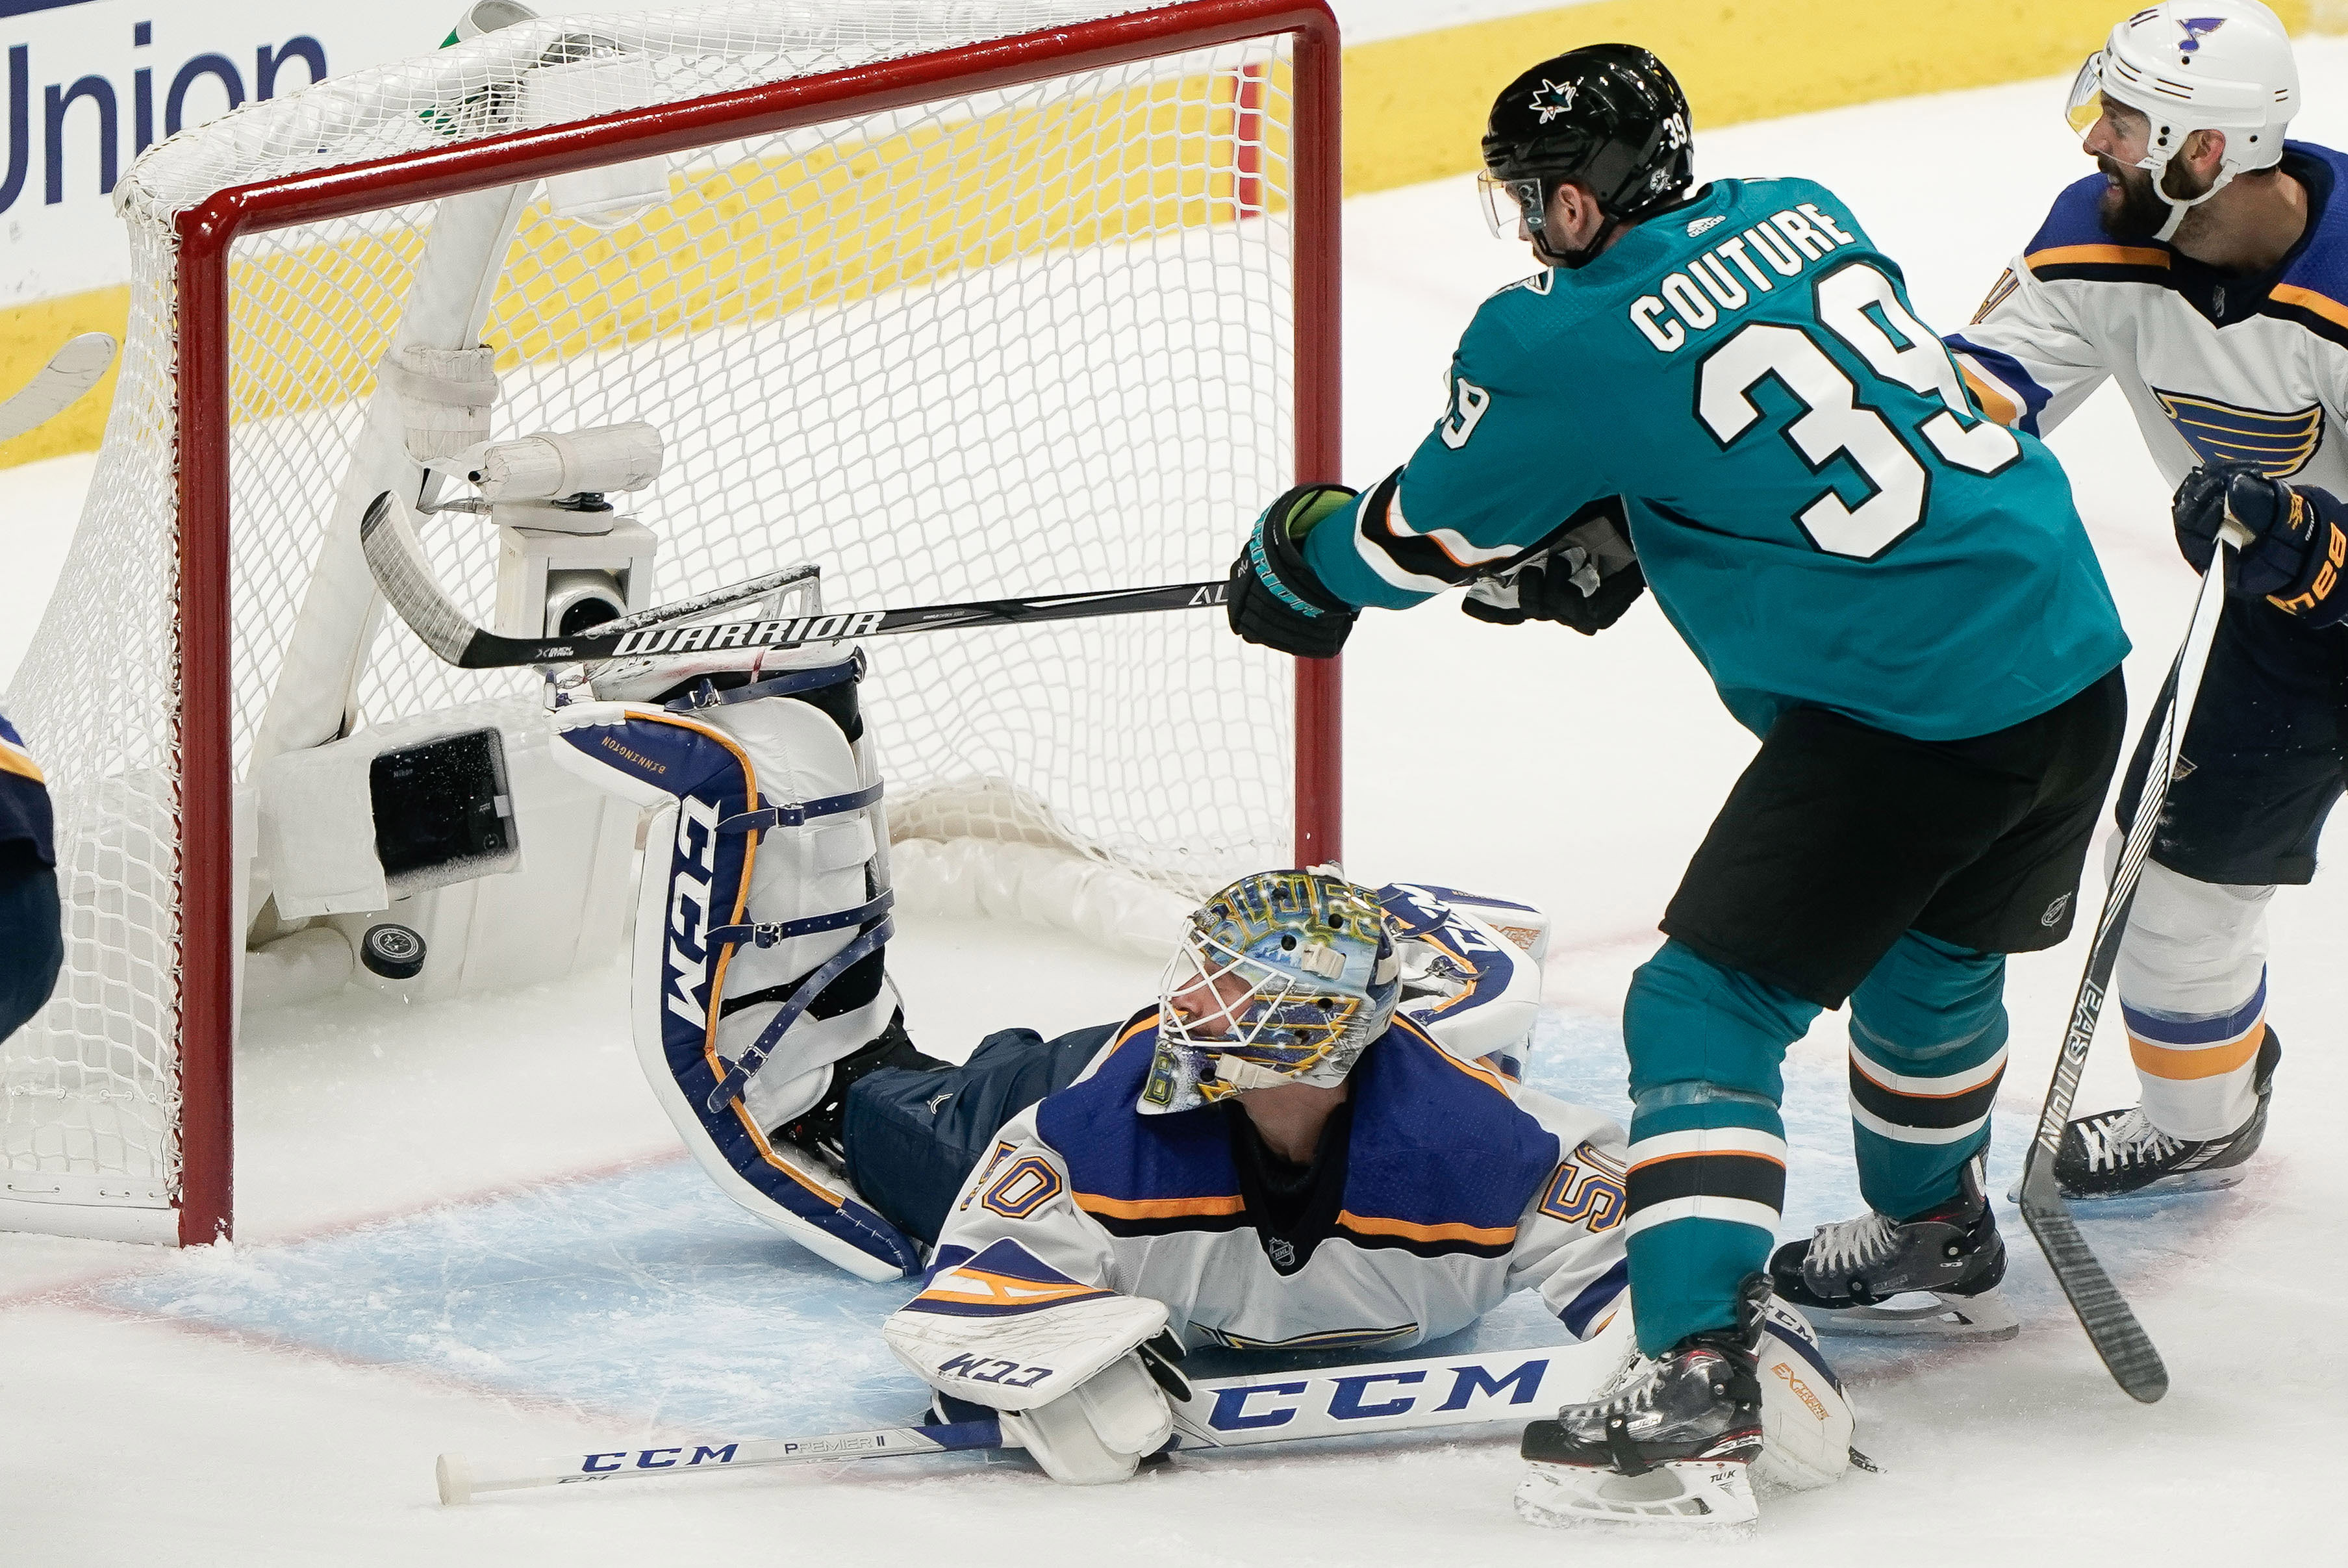 2019-05-12T013621Z_1675193836_NOCID_RTRMADP_3_NHL-STANLEY-CUP-PLAYOFFS-ST-LOUIS-BLUES-AT-SAN-JOSE-SHARKS